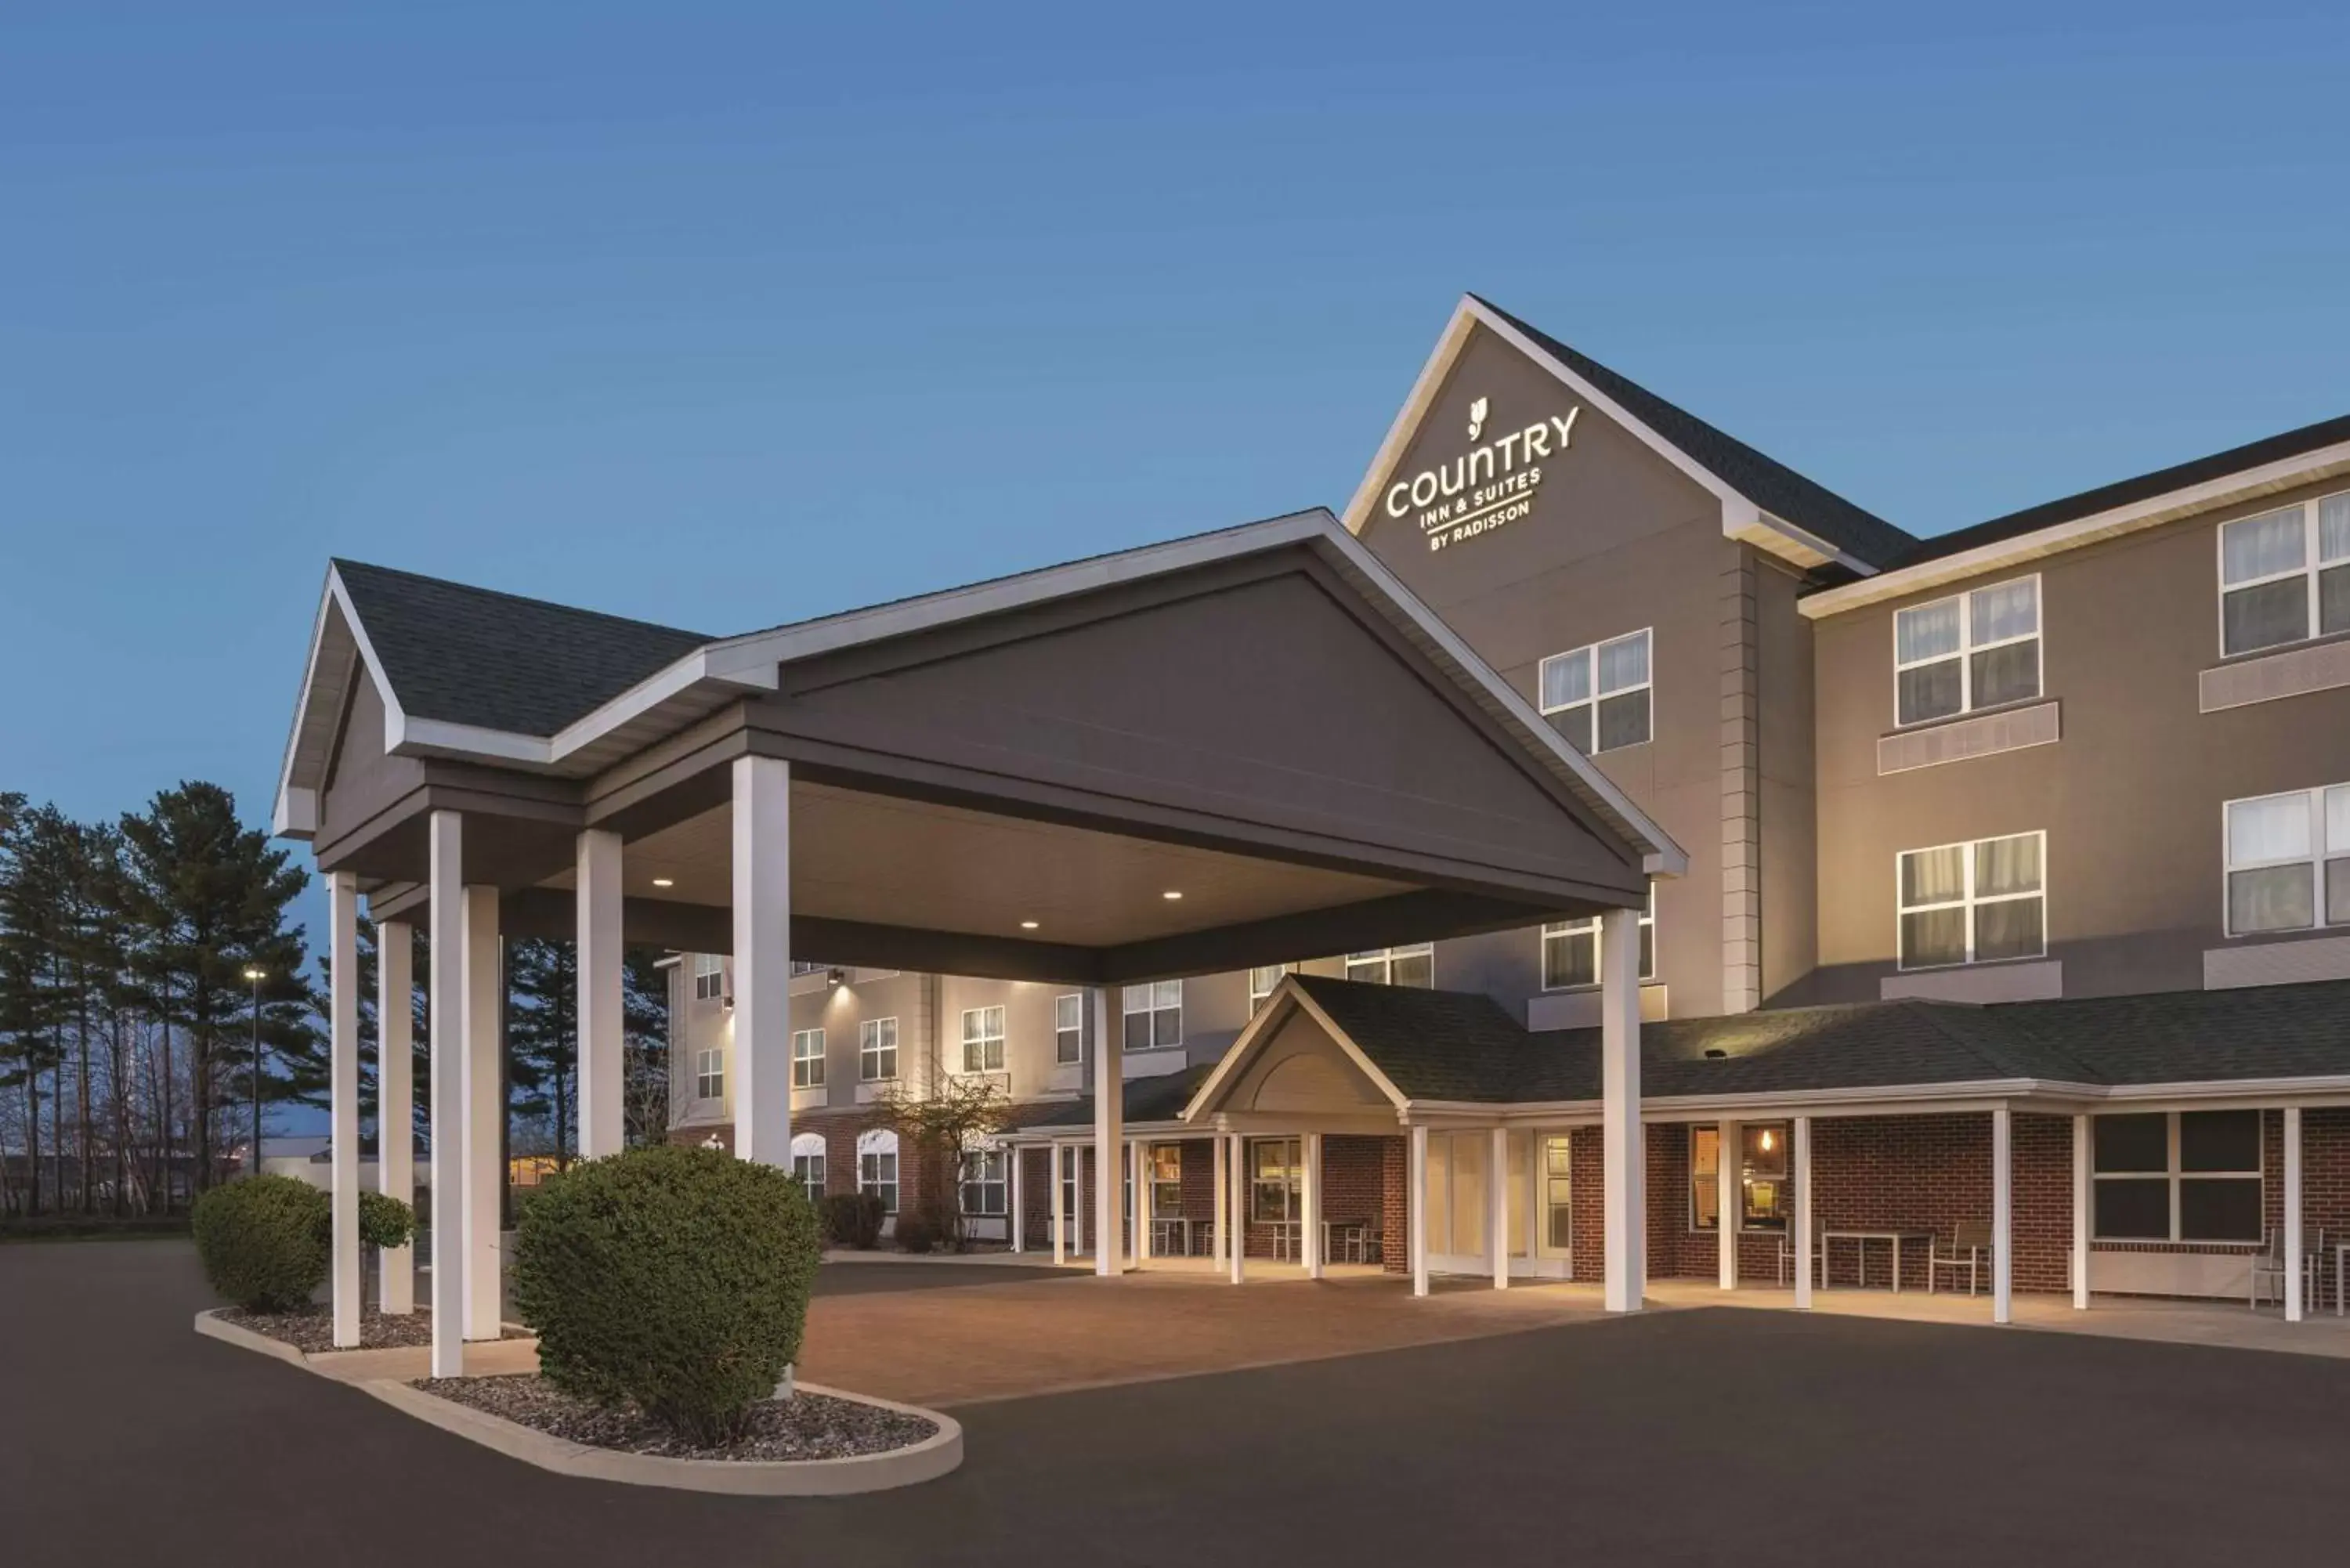 Property building in Country Inn & Suites by Radisson, Marinette, WI